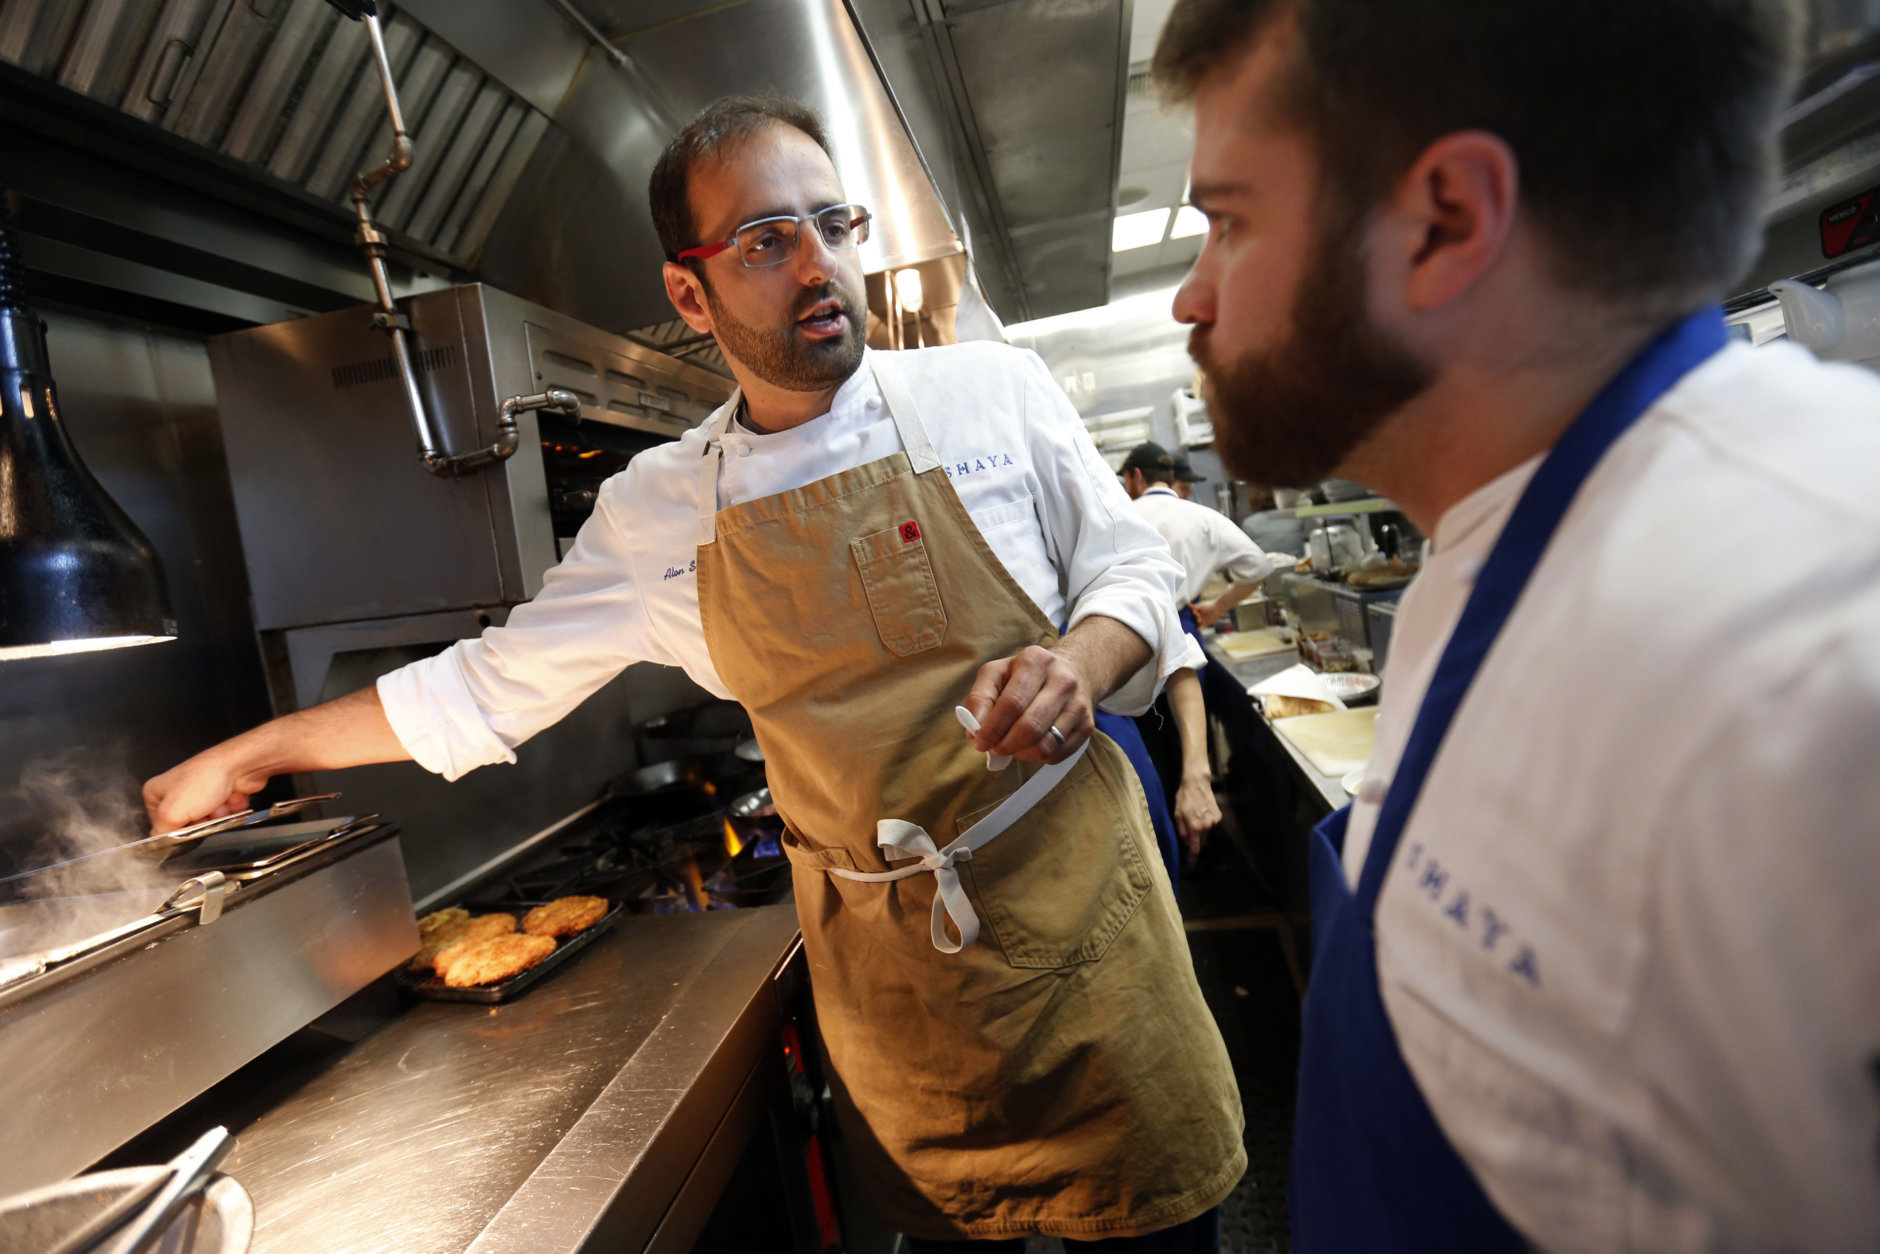 In this May 31, 2016 photo, Chef Alon Shaya, left, proprietor of Shaya Restaurant, works with sous chef Daniel Hollier at his restaurant in New Orleans. In 2015, Shaya opened his namesake restaurant, a bustling Israeli eatery on chic Magazine Street that the James Beard Foundation last month named the Best New Restaurant in the U.S. (AP Photo/Gerald Herbert)